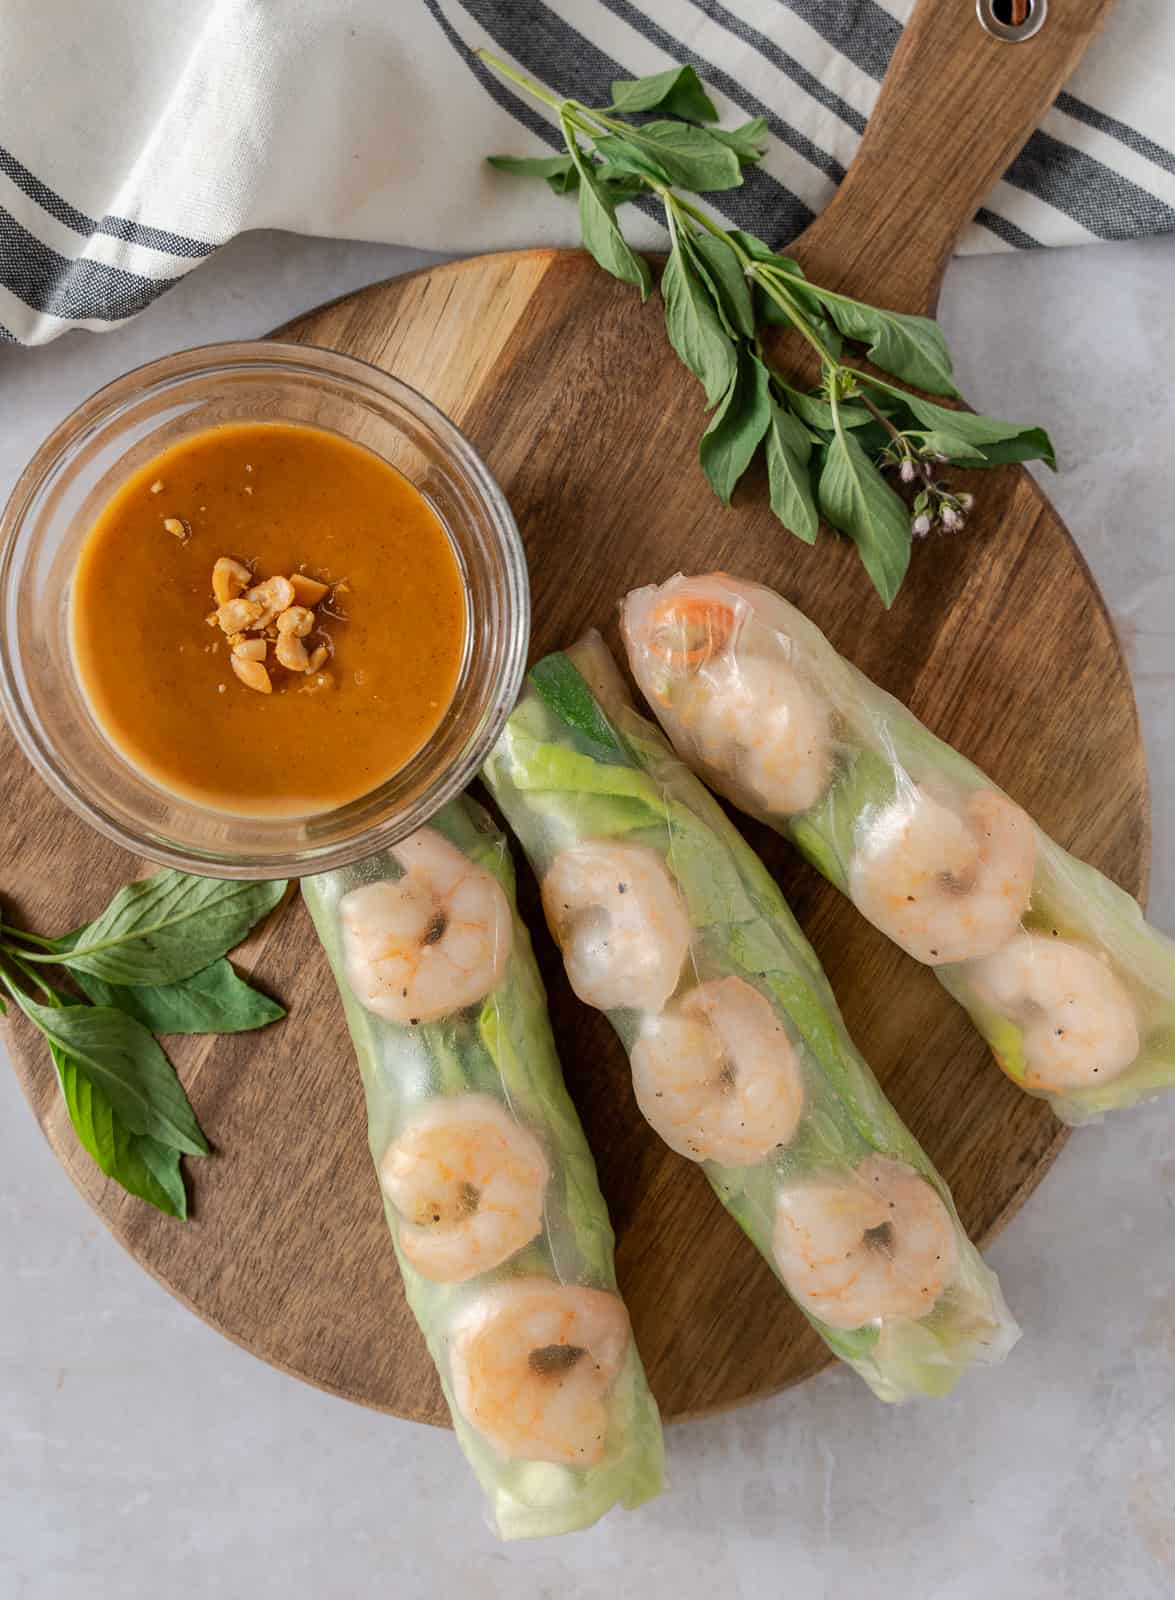 Overhead view of 3 rice paper rolls on a round board with a small bowl of peanut dipping sauce.